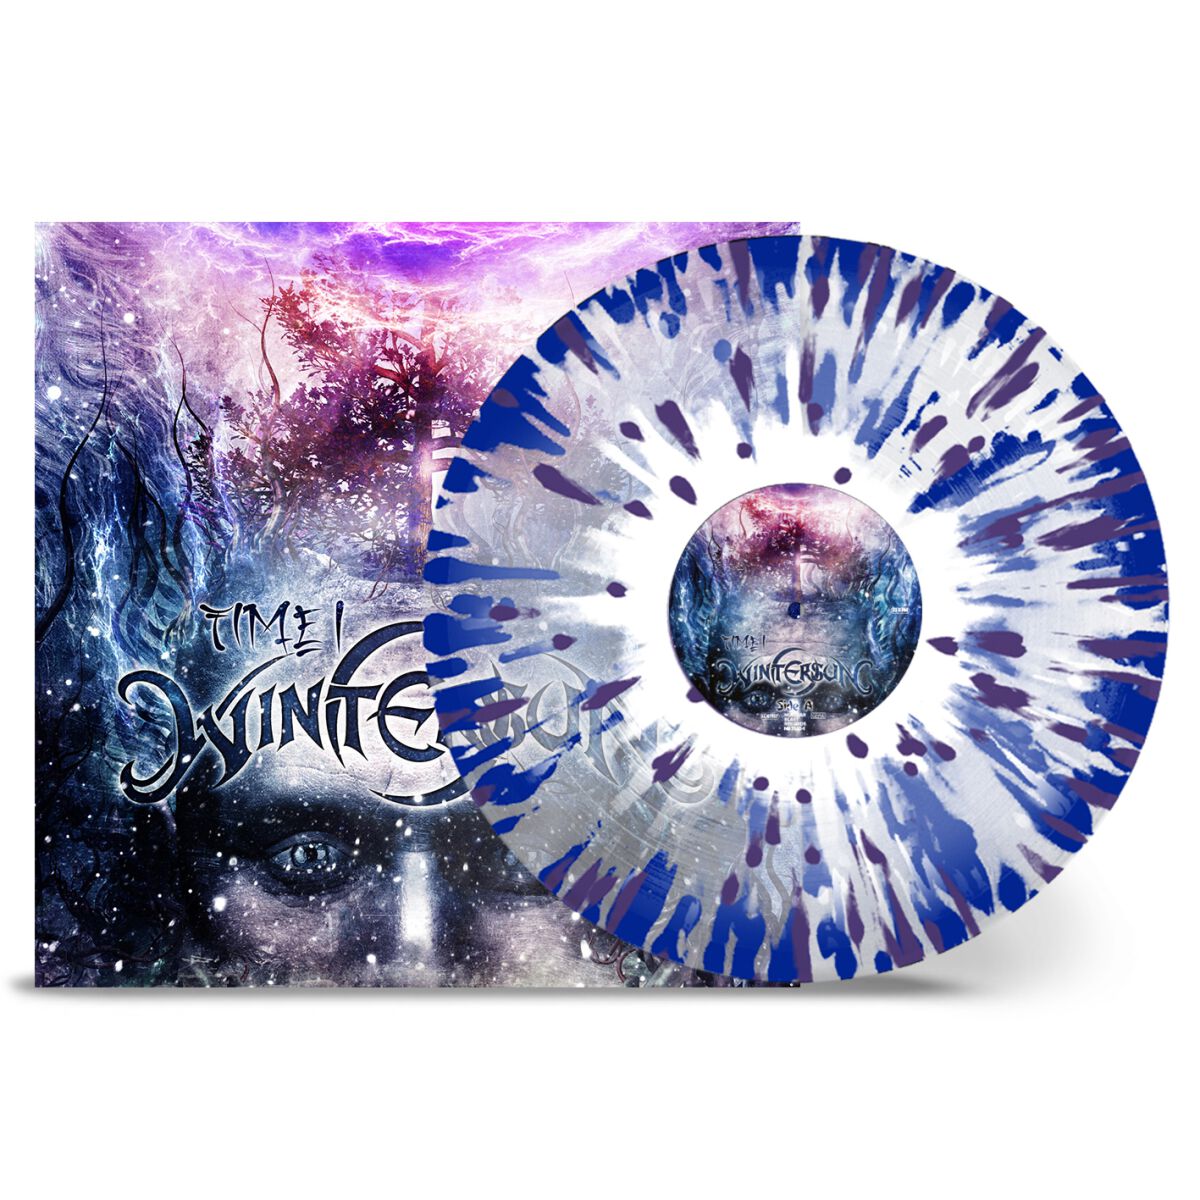 Wintersun – Time I LP (Clear with Blue, White and Purple Splatter Vinyl)